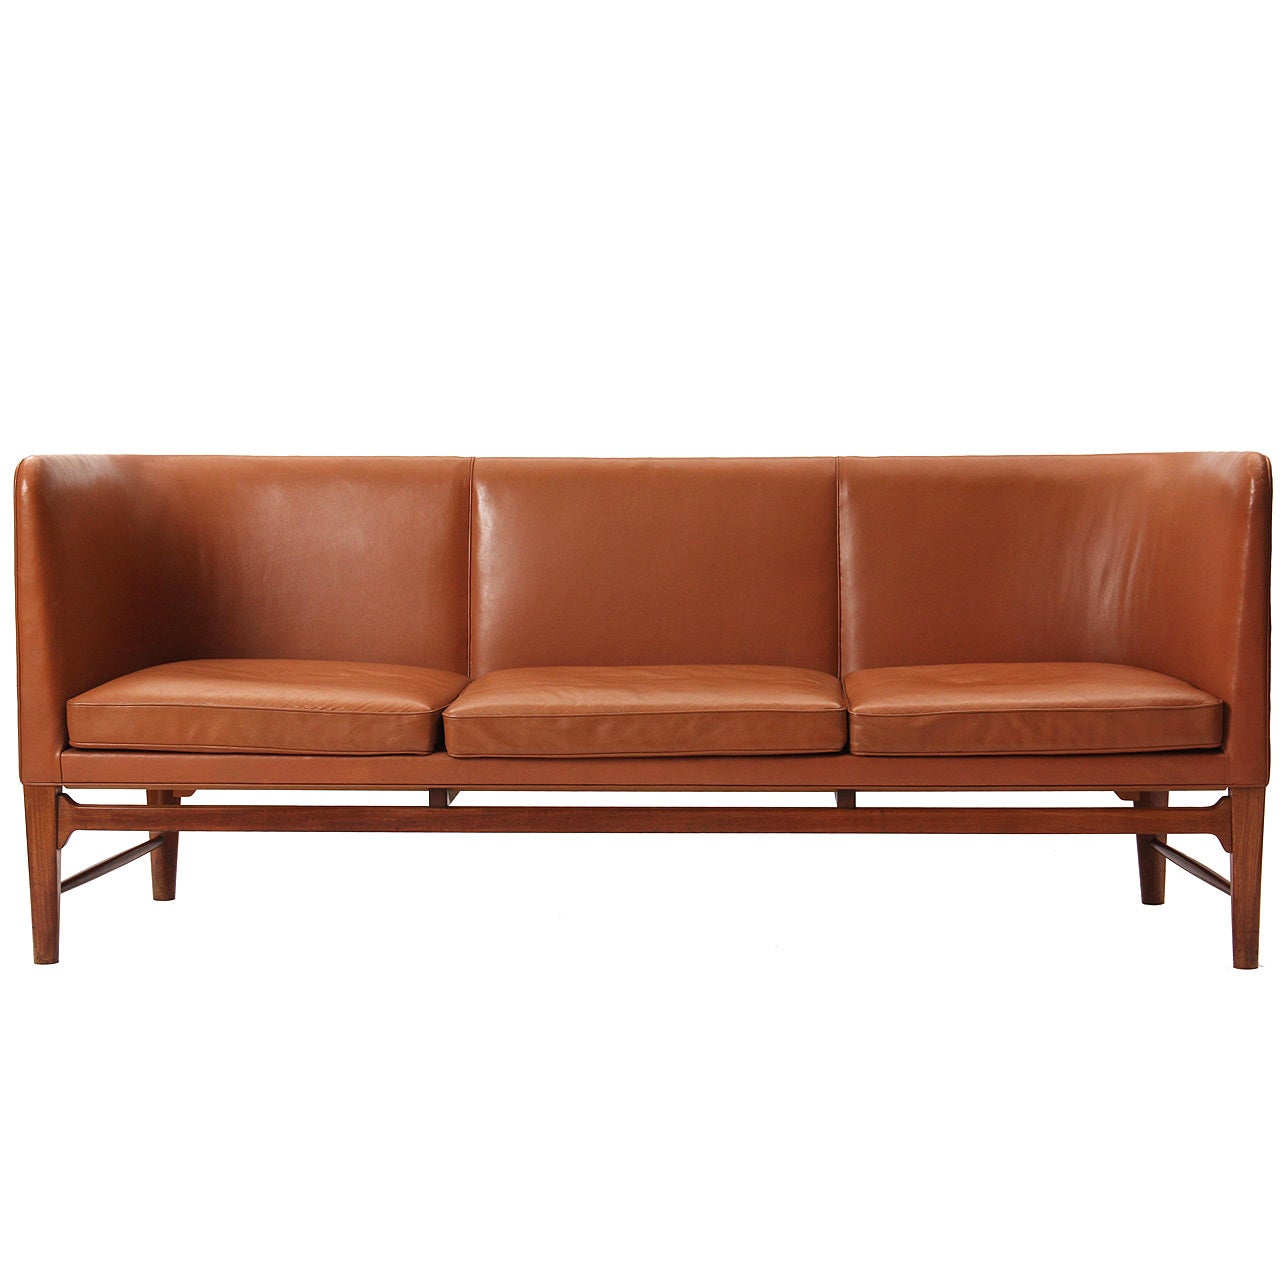 Even-Arm Sofa by Arne Jacobsen